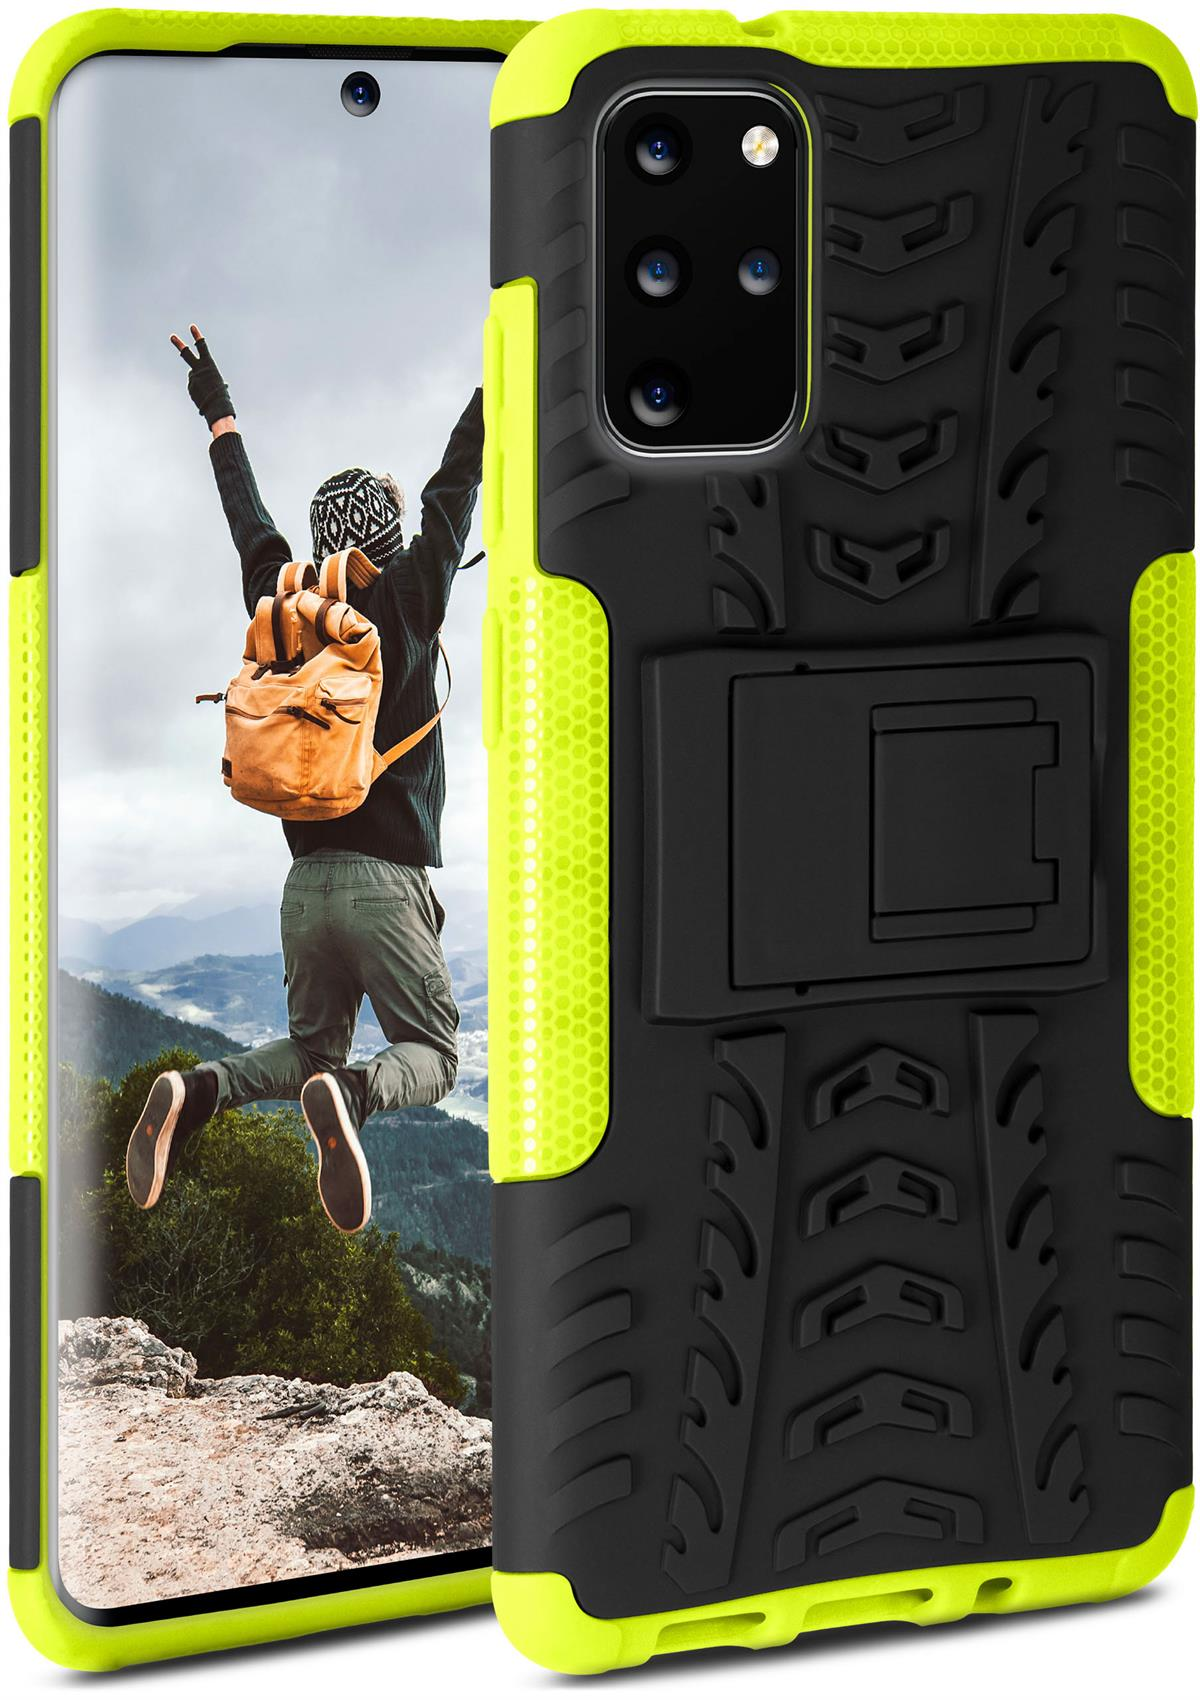 Case, S20 Lime 5G, Plus ONEFLOW Samsung, Galaxy Tank Backcover,